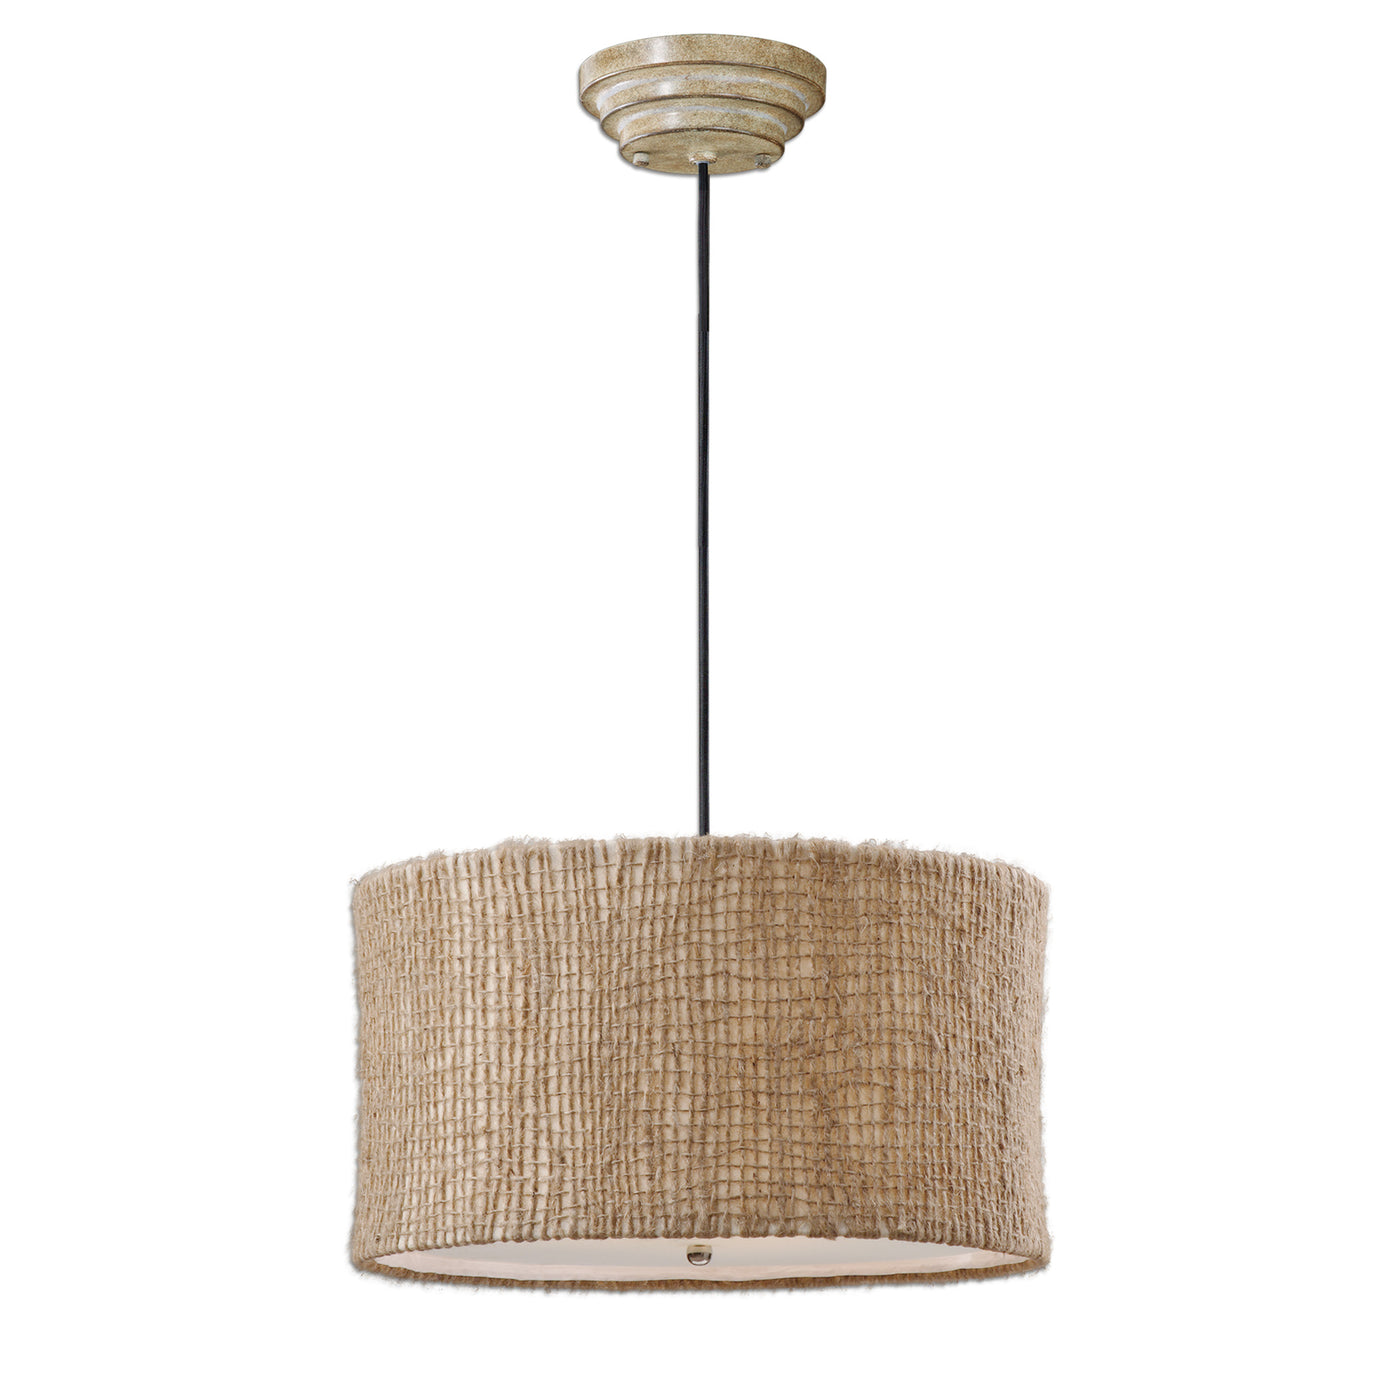 Natural Twine With An Open Weave Construction And A Beige Inner Liner Creates A Rustic, Yet Unique Appeal. Frosted Glass D...